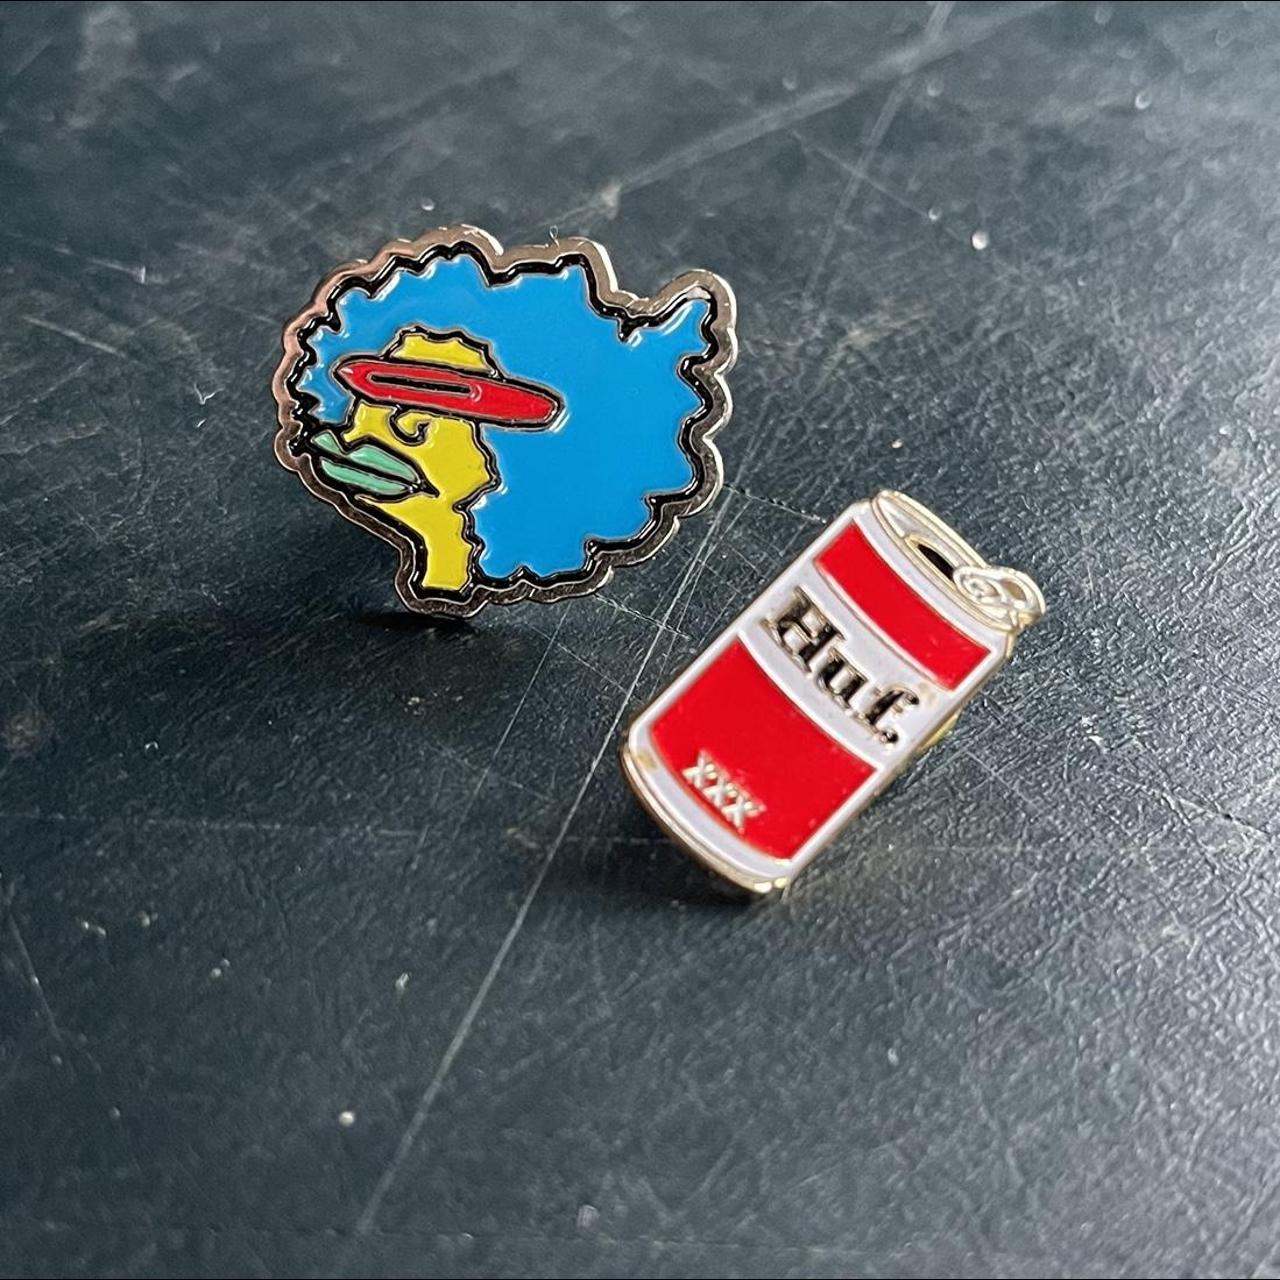 Skateboarding pin set. Includes:, 1) Supreme pin by...